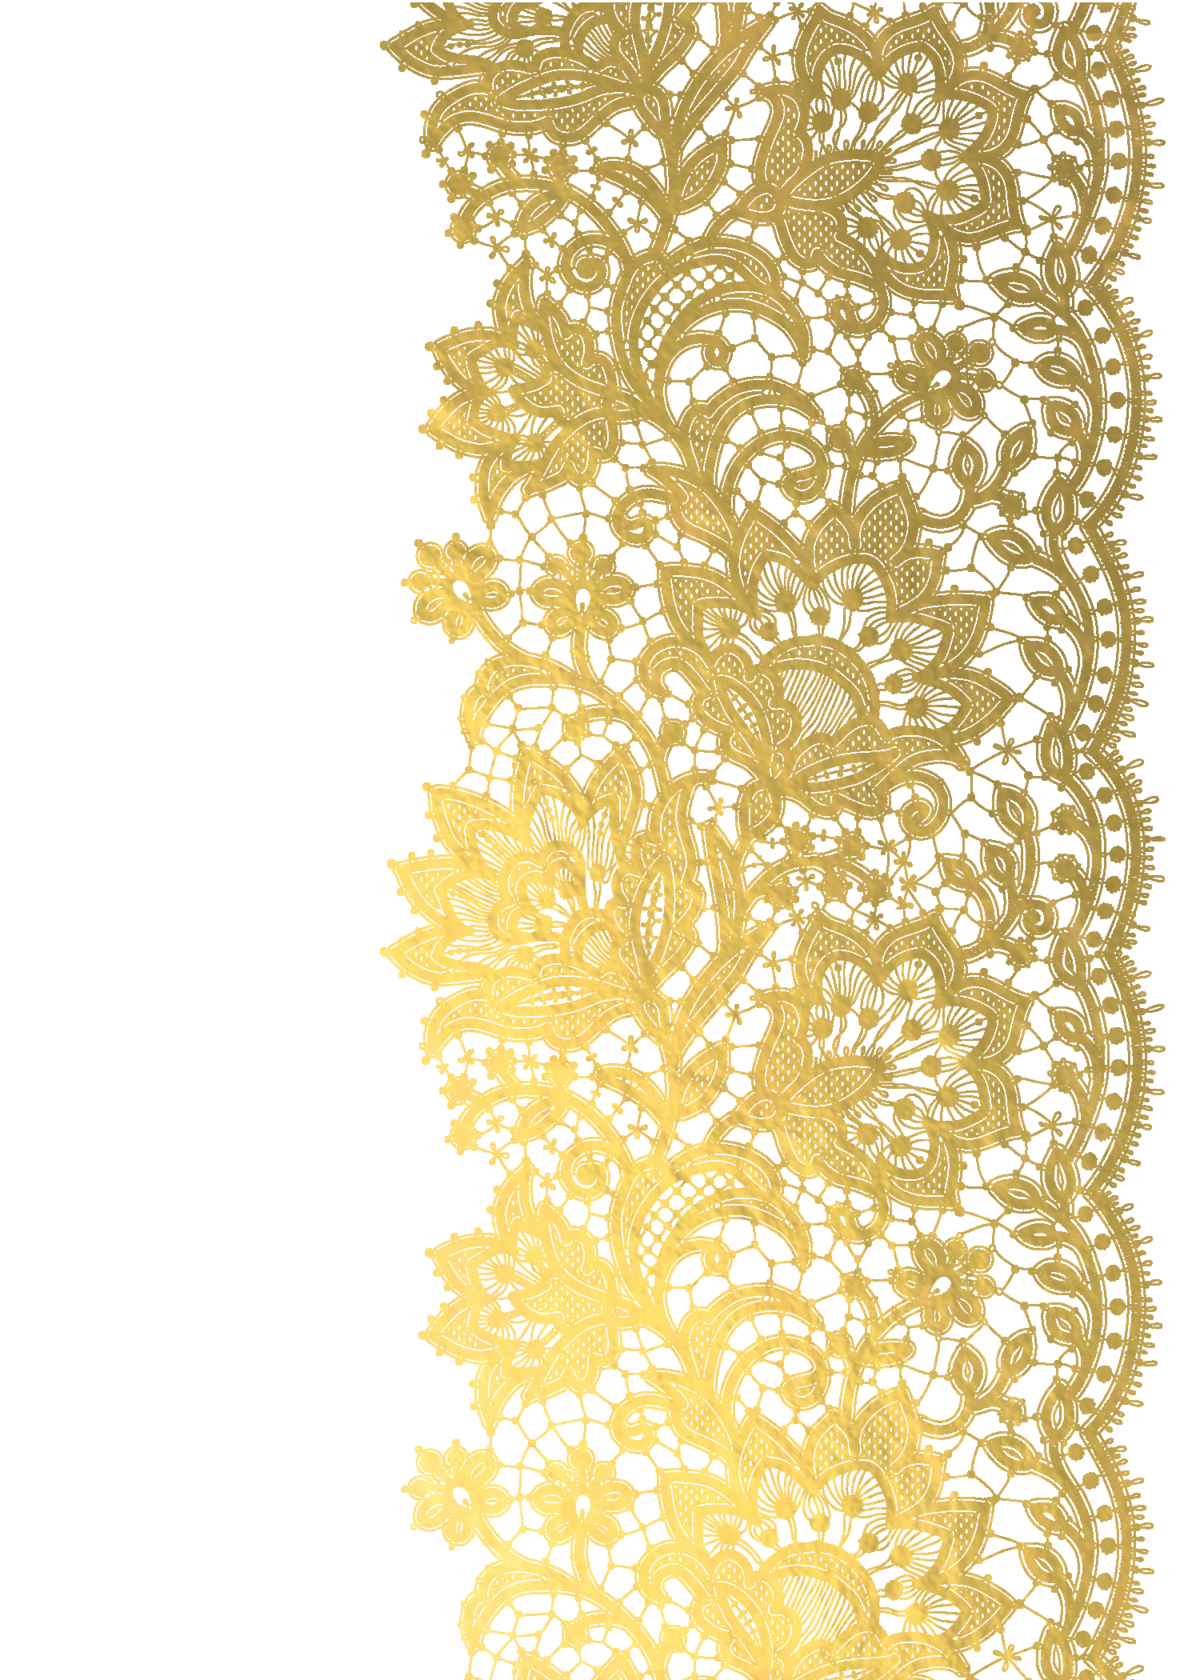 Download 21 lace-transparent-background Free-Lace-Background-Png-Download-Free-Clip-Art-Free-Clip-.png